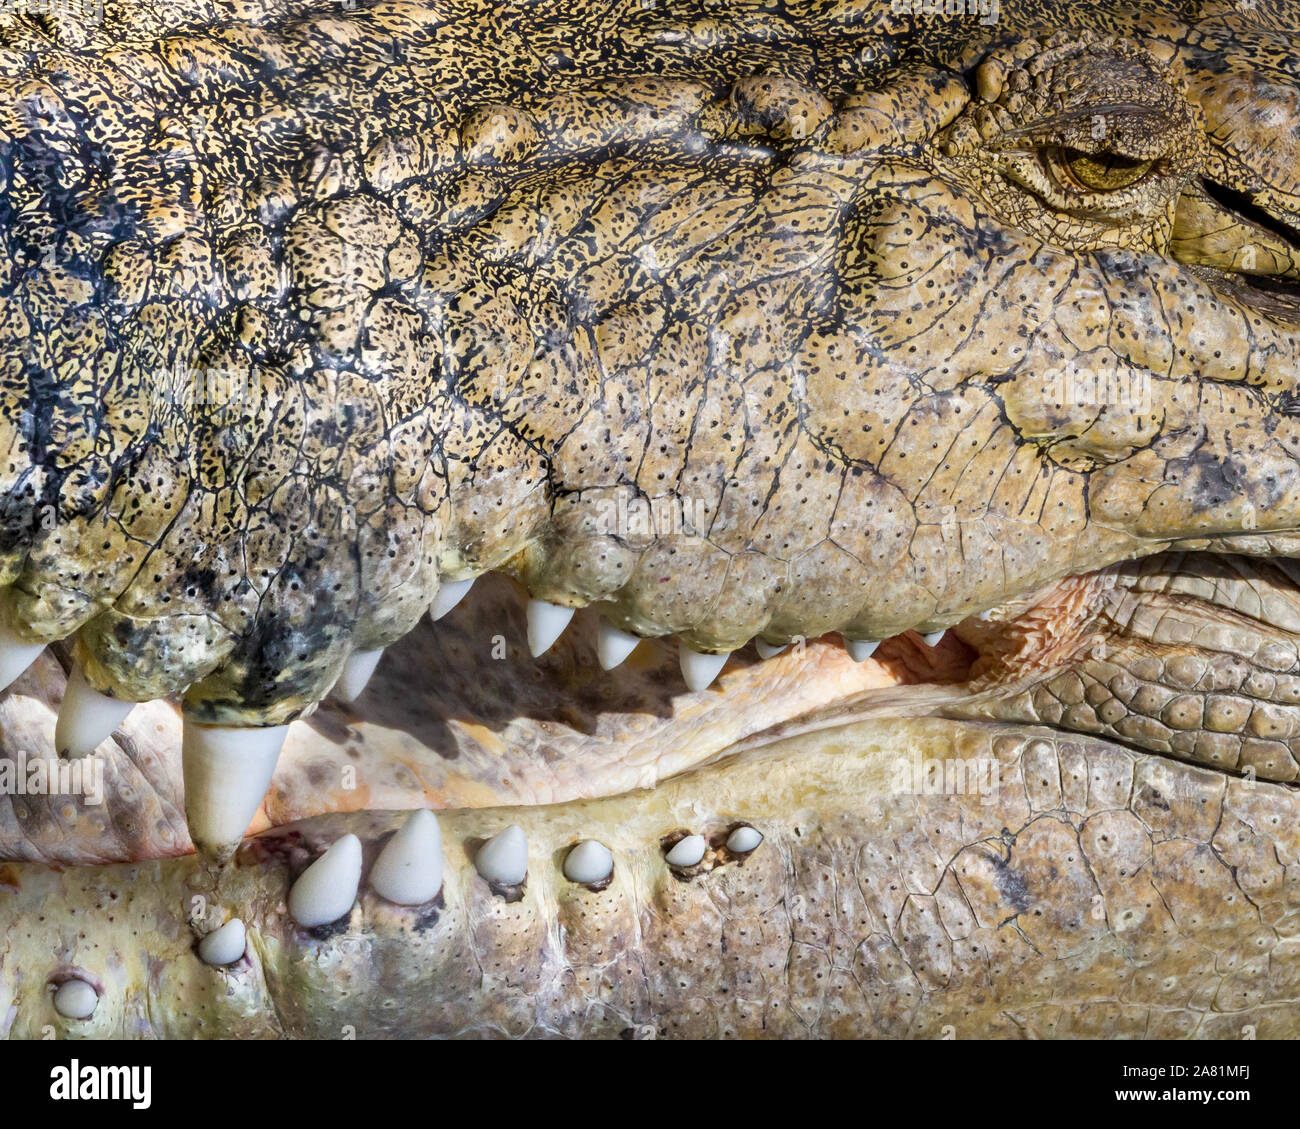 Fearsome Grin - A large crocodile shares a powerful smile. Wildlife Dome, Cairns, Queensland, Australia Stock Photo